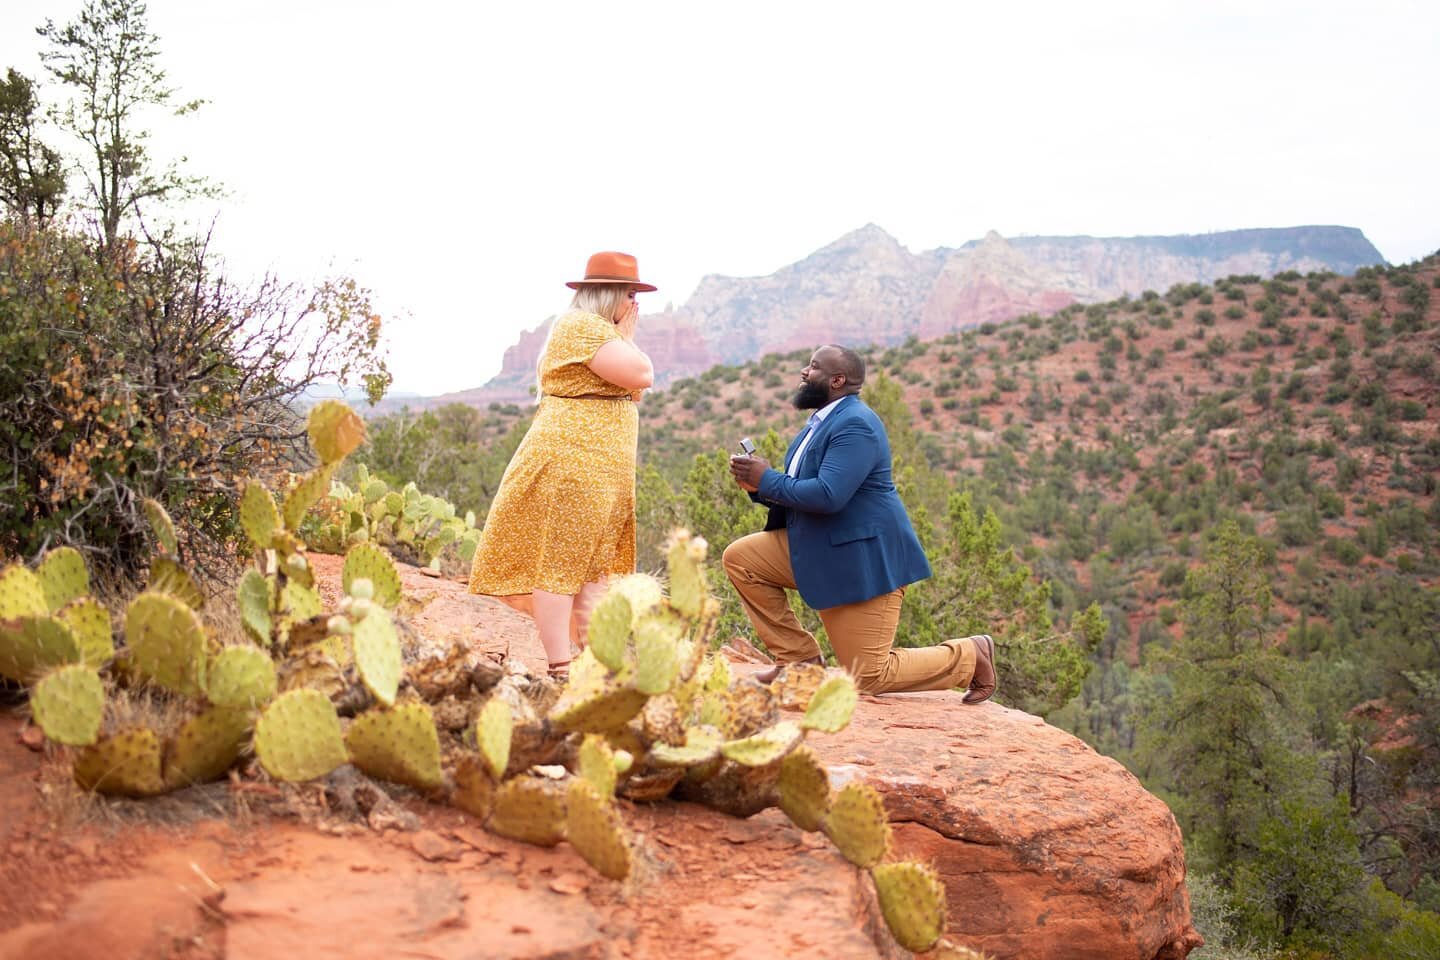 the magic of the moment
&bull;
Melissa had always dreamed of visiting Sedona so for her 30th birthday her boyfriend and their mothers made the journey down here from the PNW.

little did she know, Joey reached out to plan a fun photoshoot for the fou